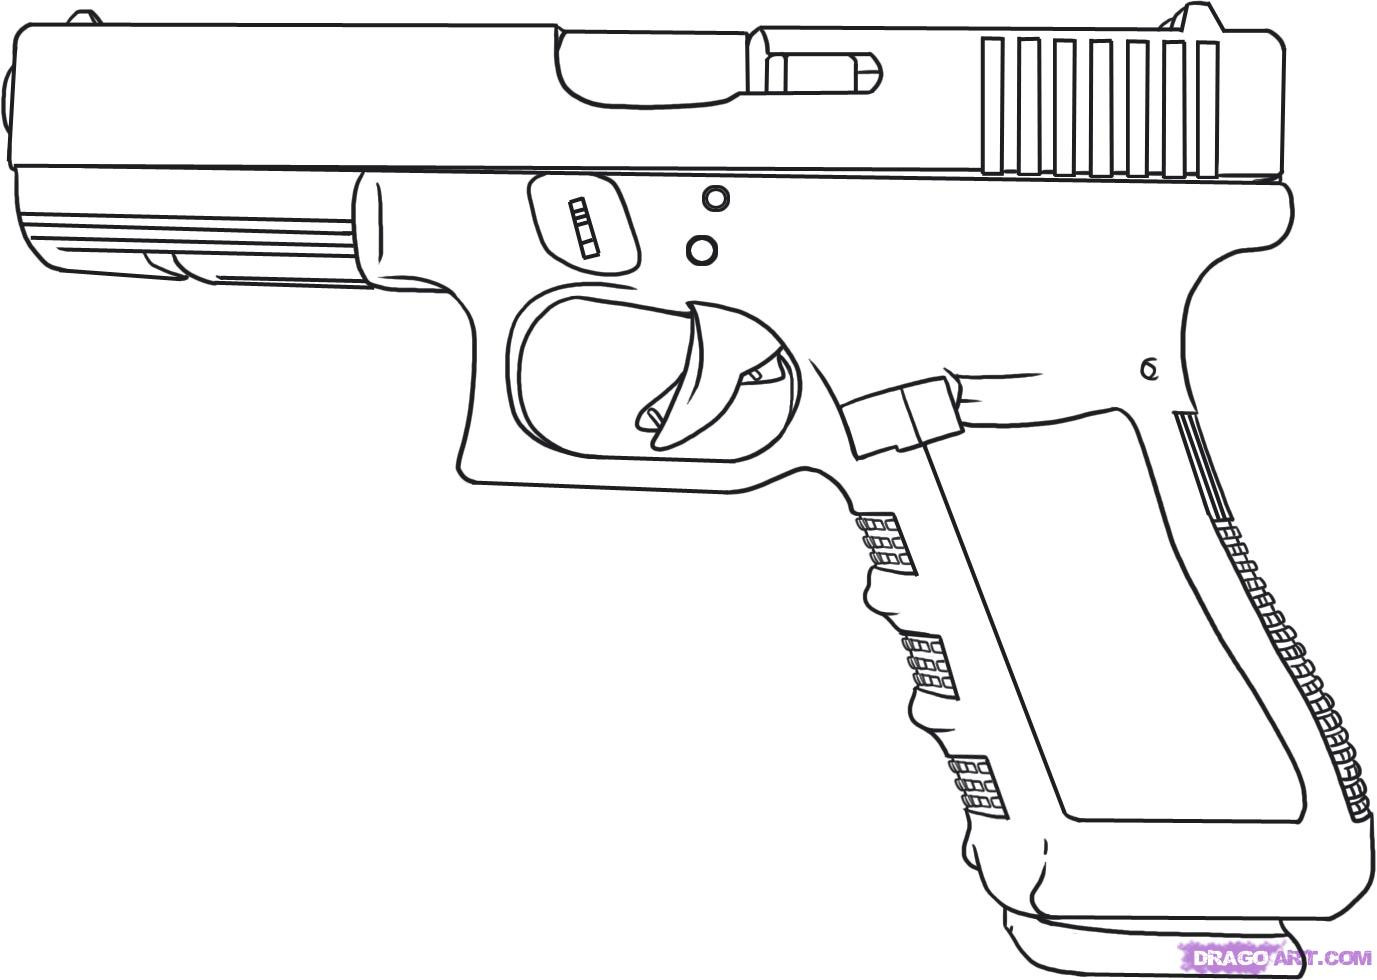 Gun People Coloring Sheets For Boys
 Nerf Gun Coloring Pages Bestofcoloring